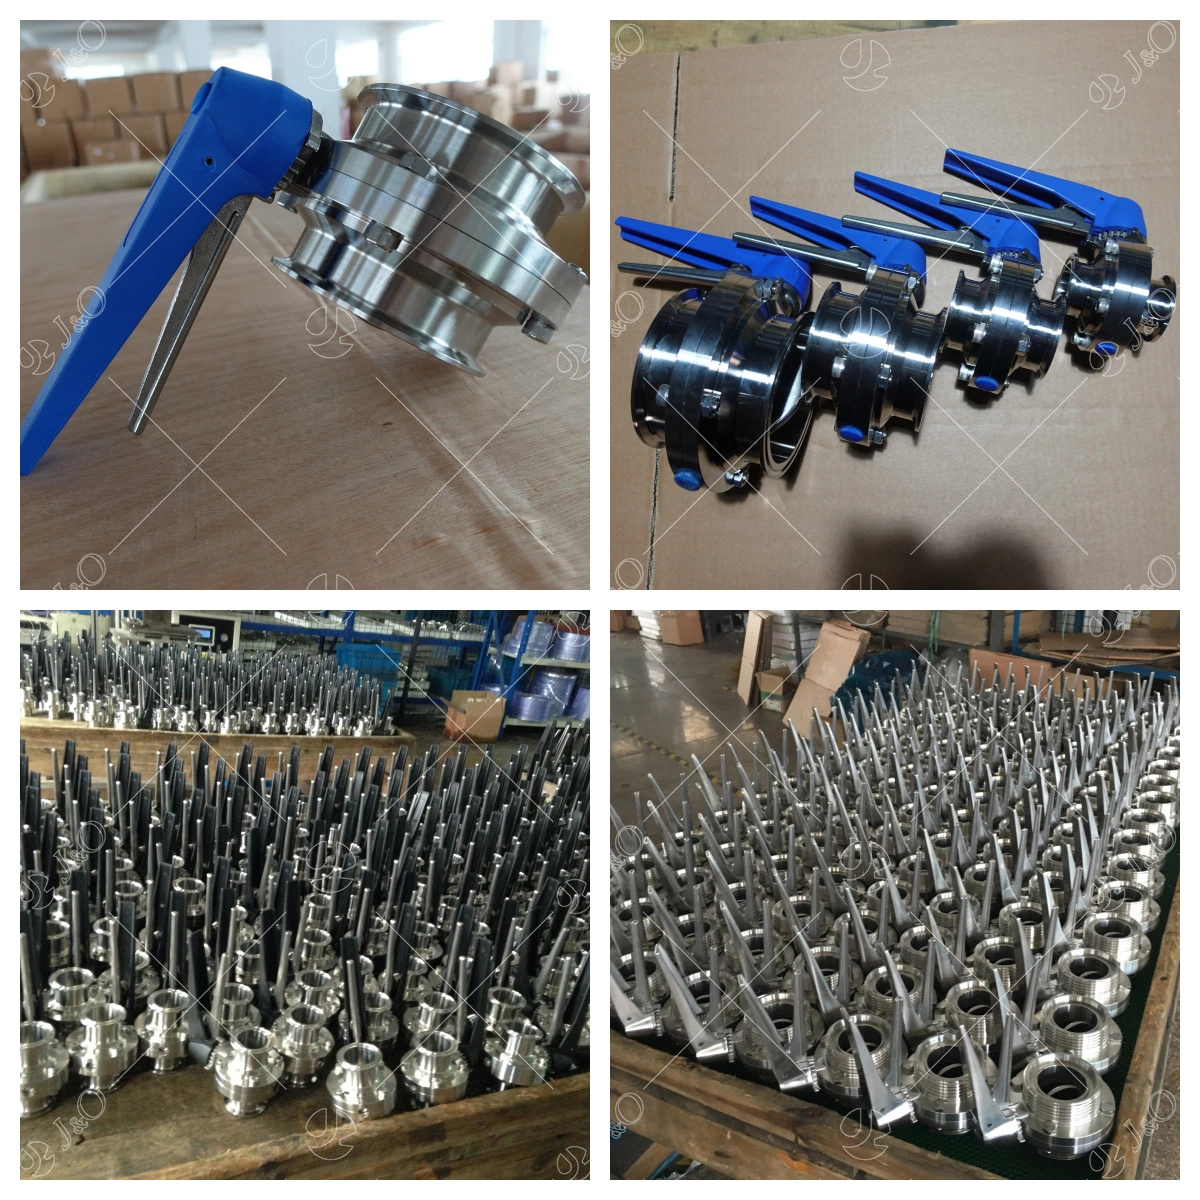 Sanitary Stainless Steel Welding Butterfly Valve With Plastic Handle